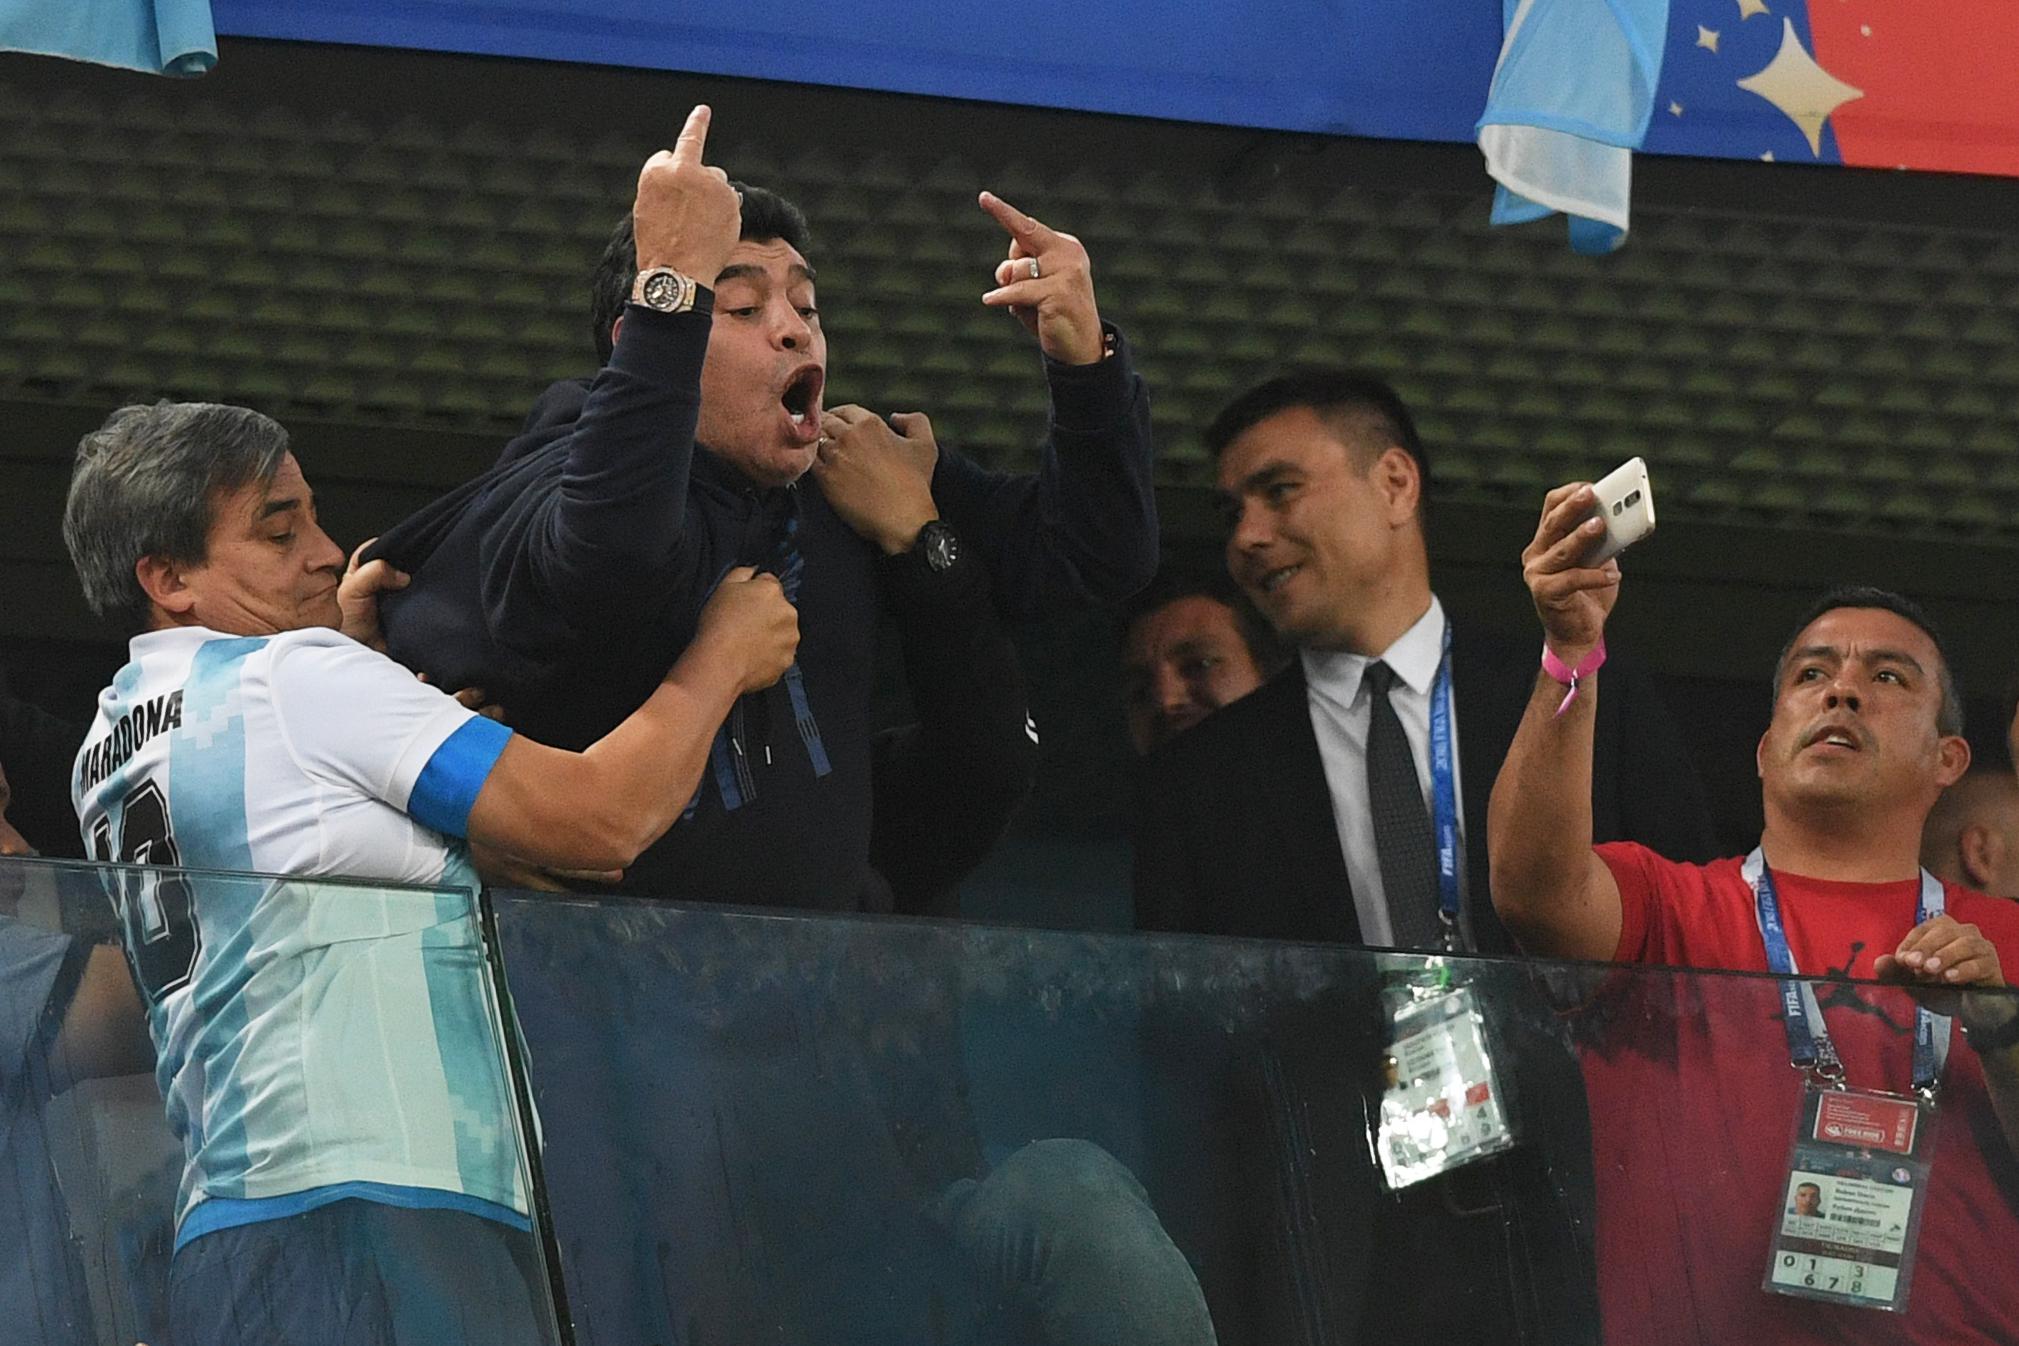 TOPSHOT - Retired Argentina player Diego Maradona (C) gestures during the Russia 2018 World Cup Group D football match between Nigeria and Argentina at the Saint Petersburg Stadium in Saint Petersburg on June 26, 2018. (Photo by OLGA MALTSEVA / AFP) / RESTRICTED TO EDITORIAL USE - NO MOBILE PUSH ALERTS/DOWNLOADS        (Photo credit should read OLGA MALTSEVA/AFP/Getty Images)